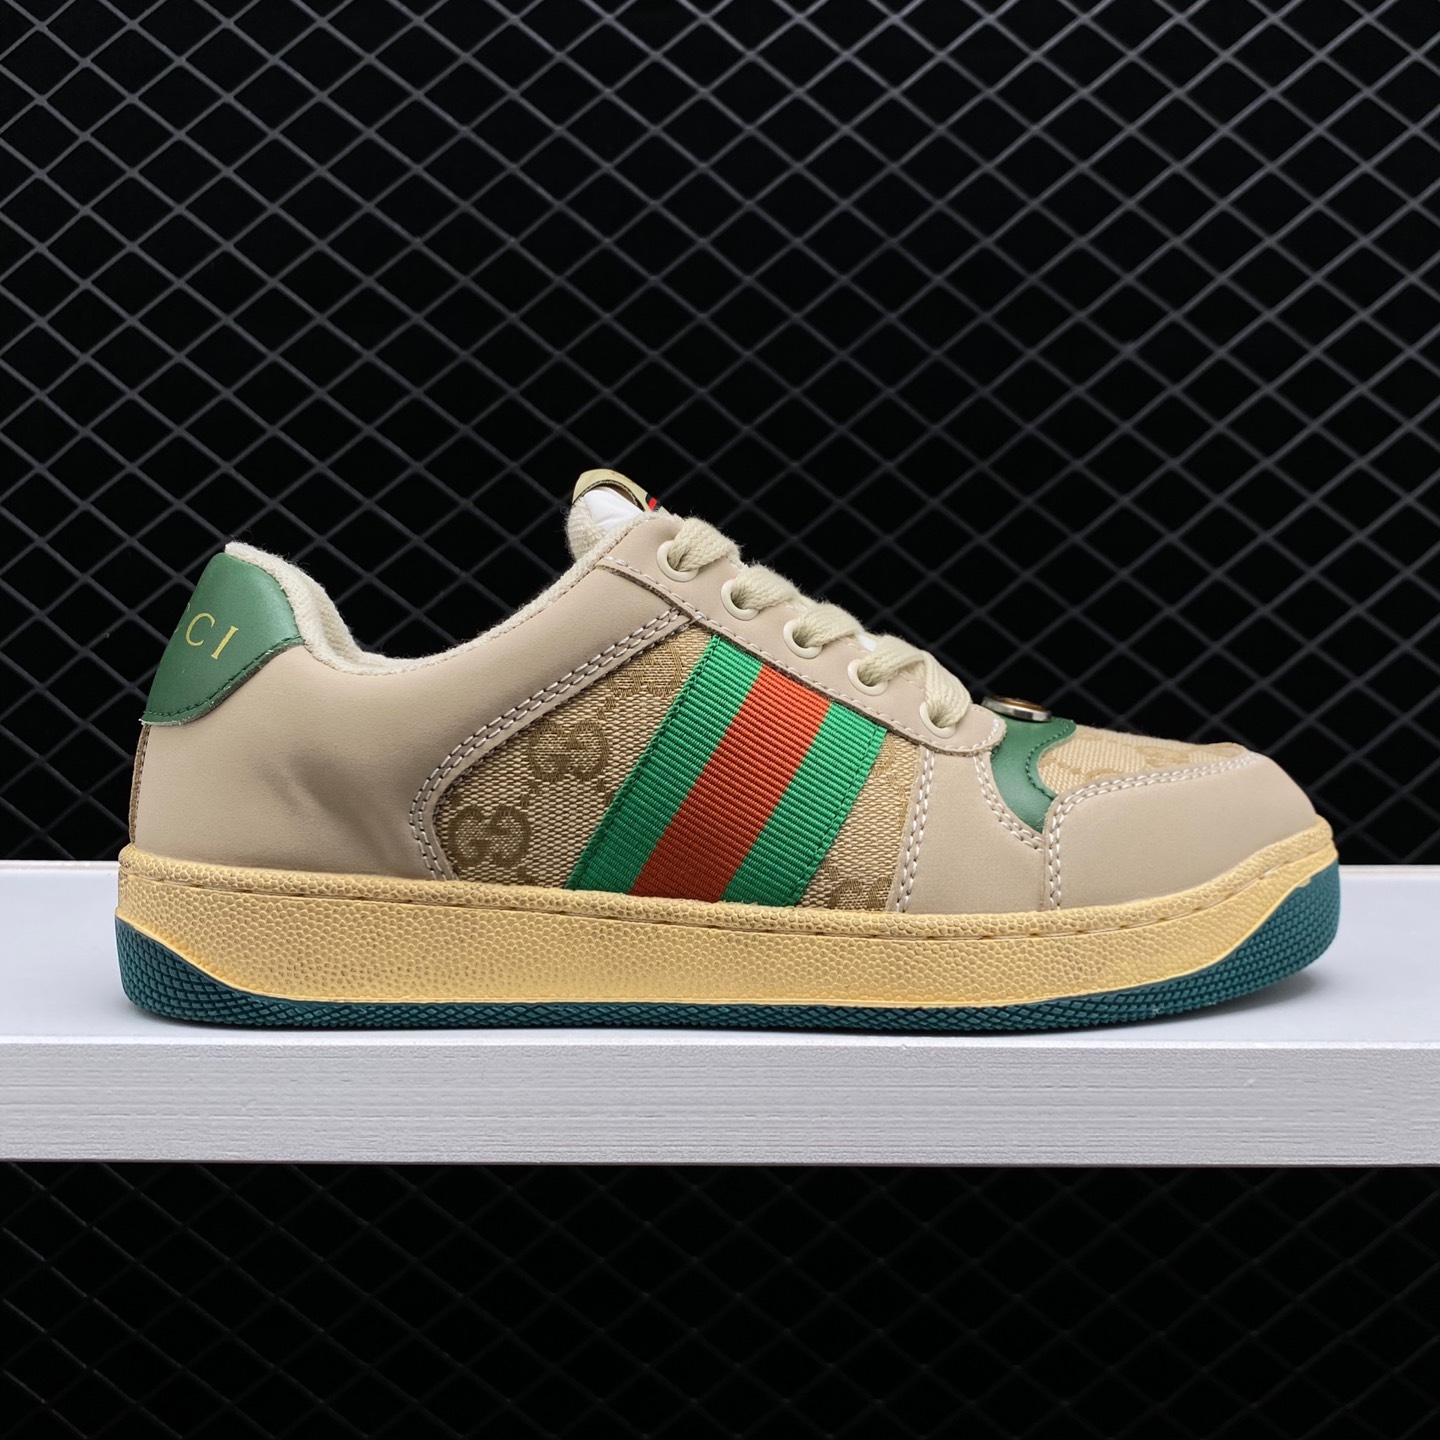 Gucci Screener Butter Leather Green Sneakers - 570443 9Y920 9666